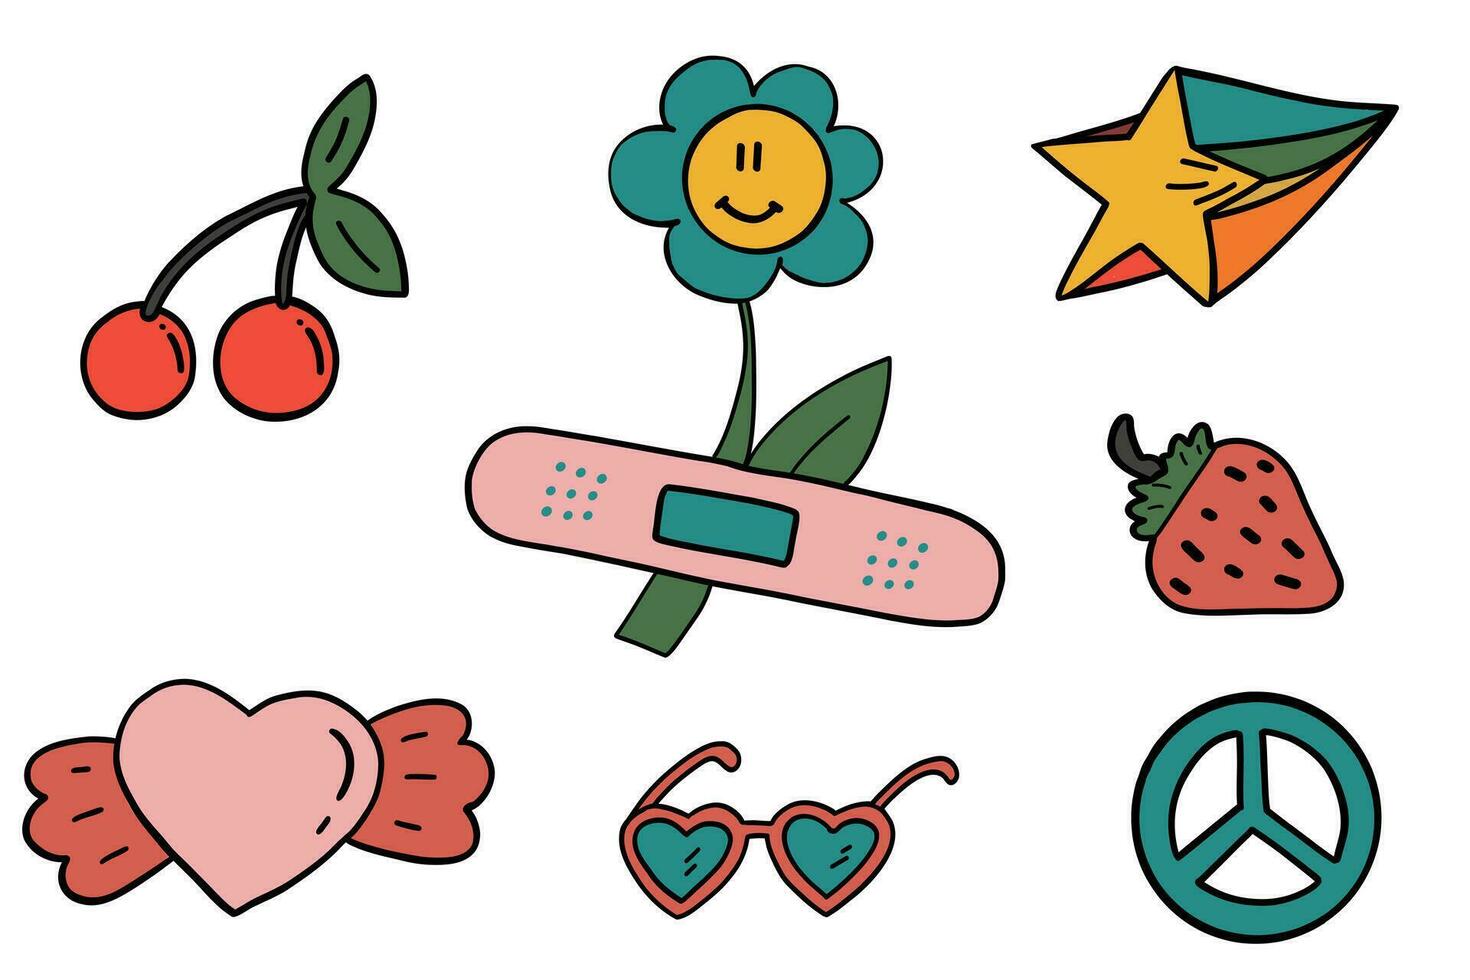 Groovy characters icons set vintage hand drawn vector